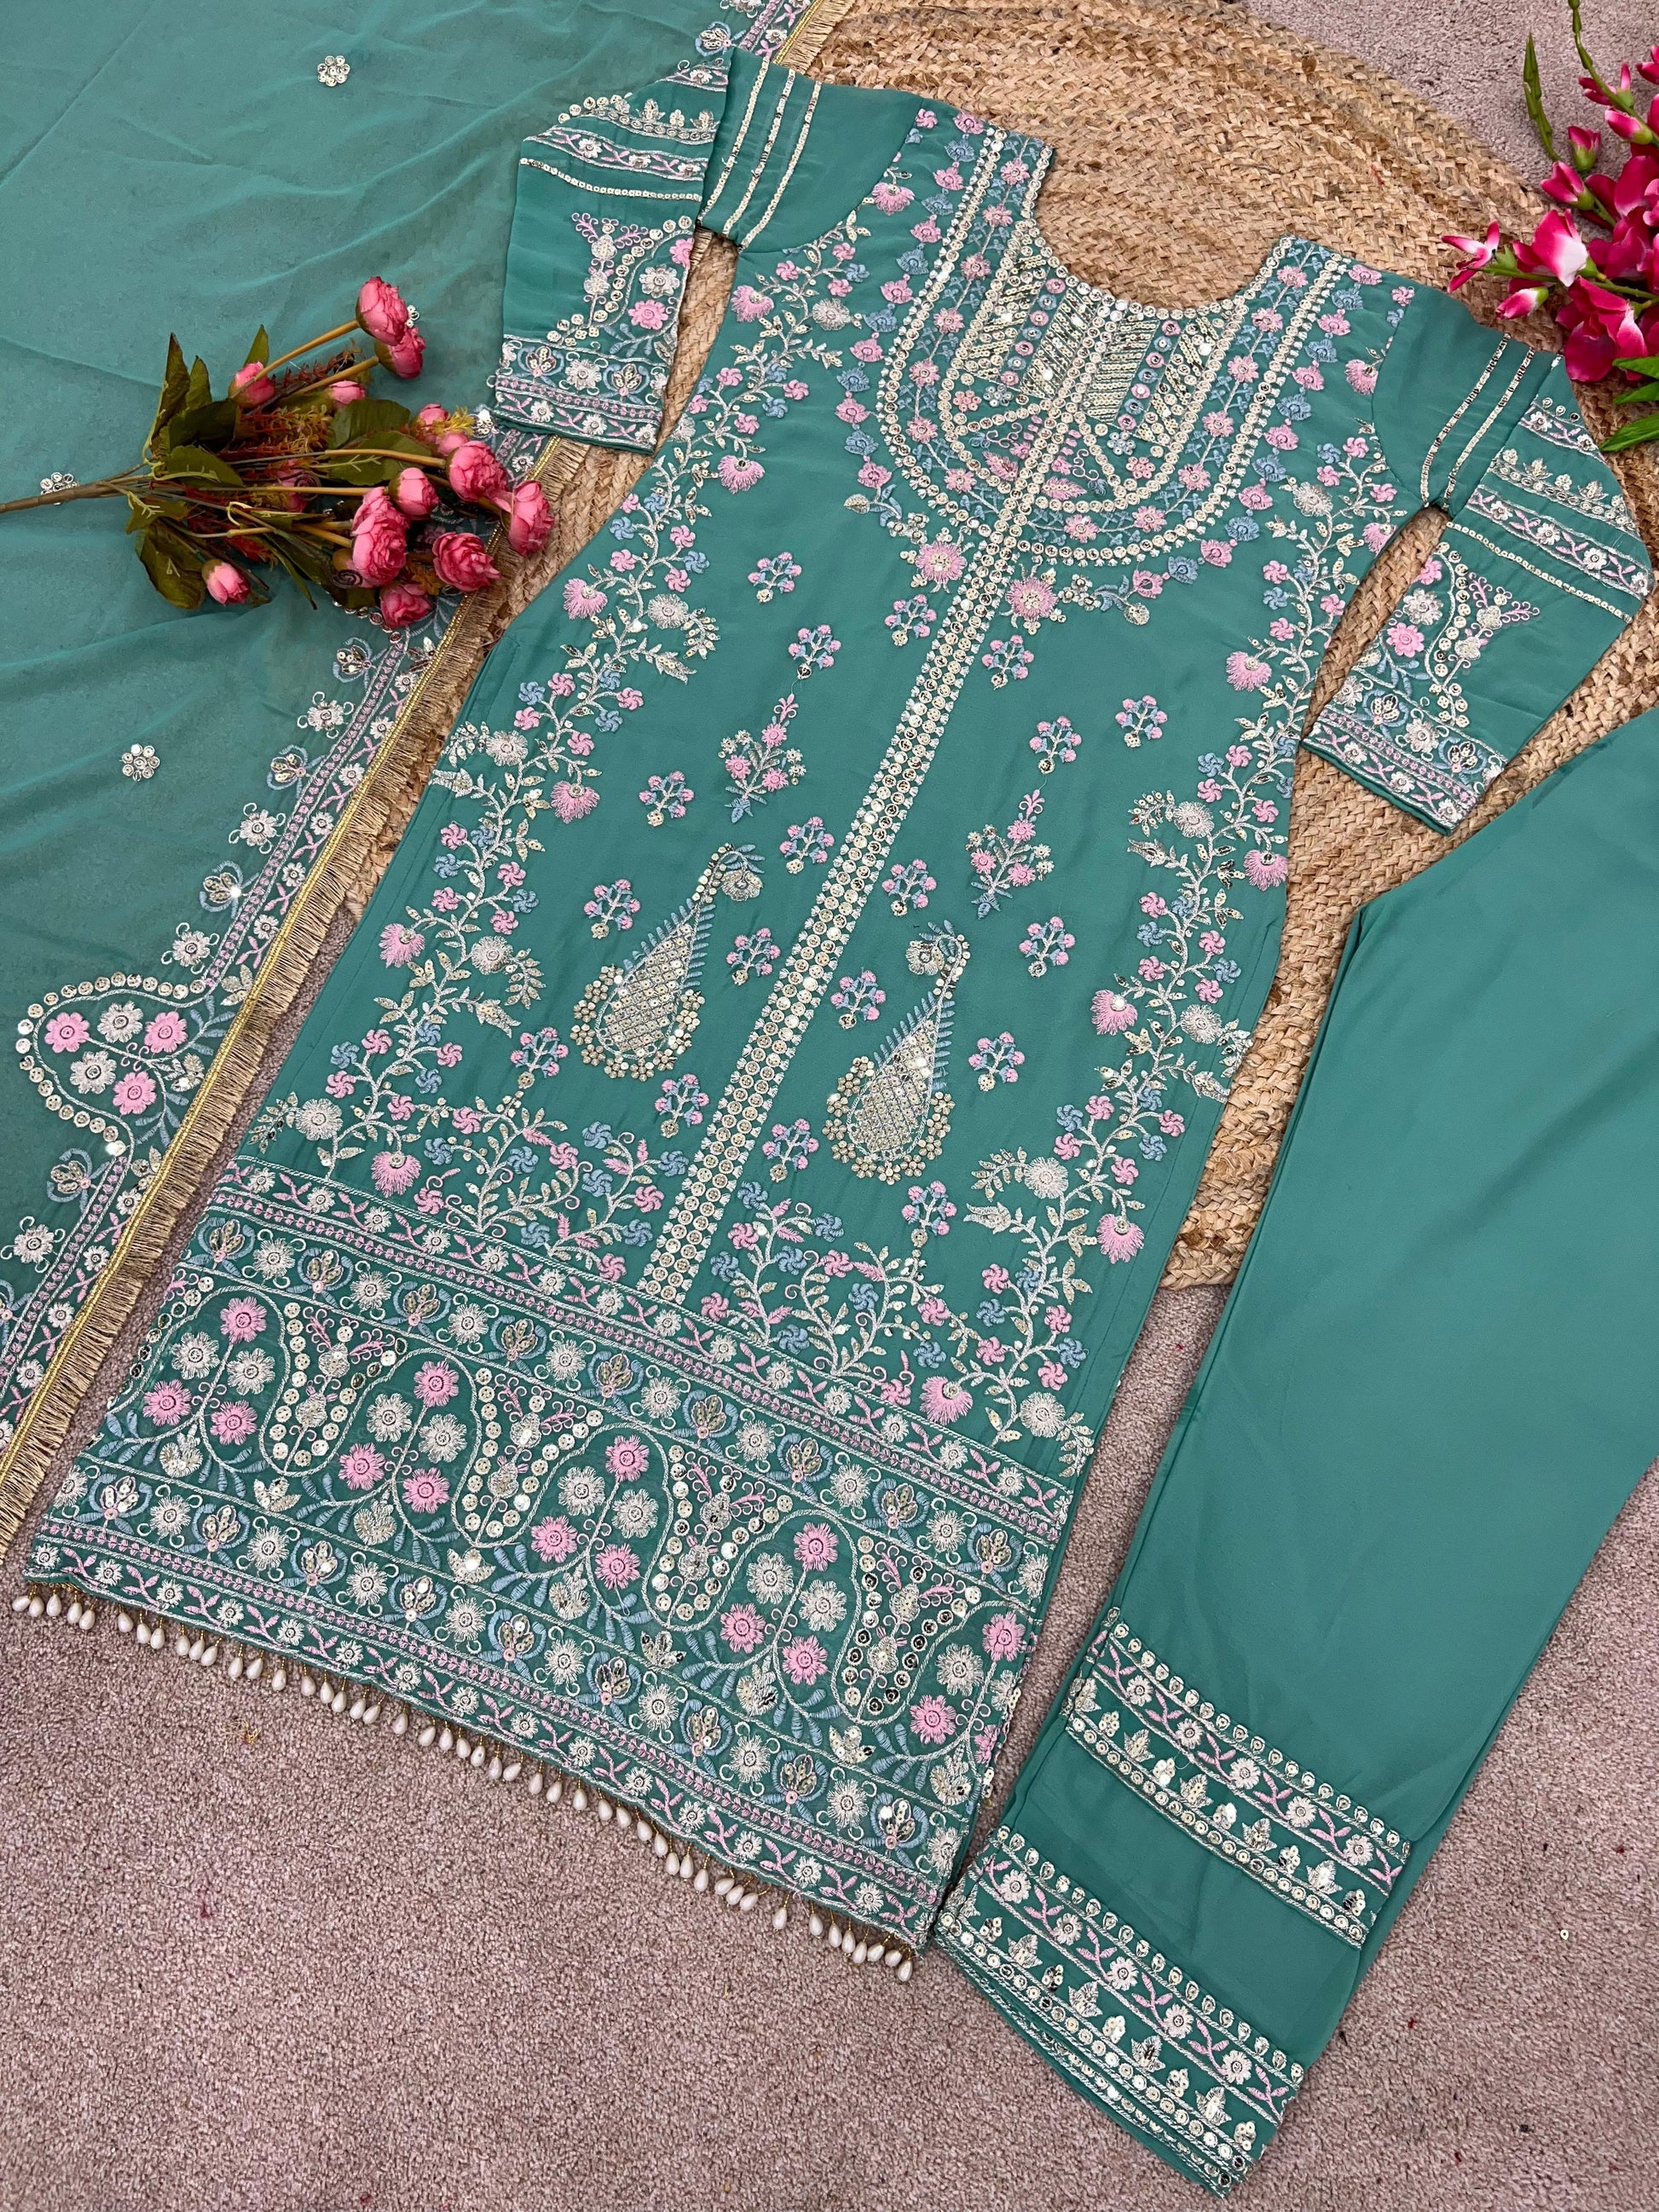 💃👚Green Elegant Georgette Embroidered Suit 👚💃 - Inayakhan Shop 